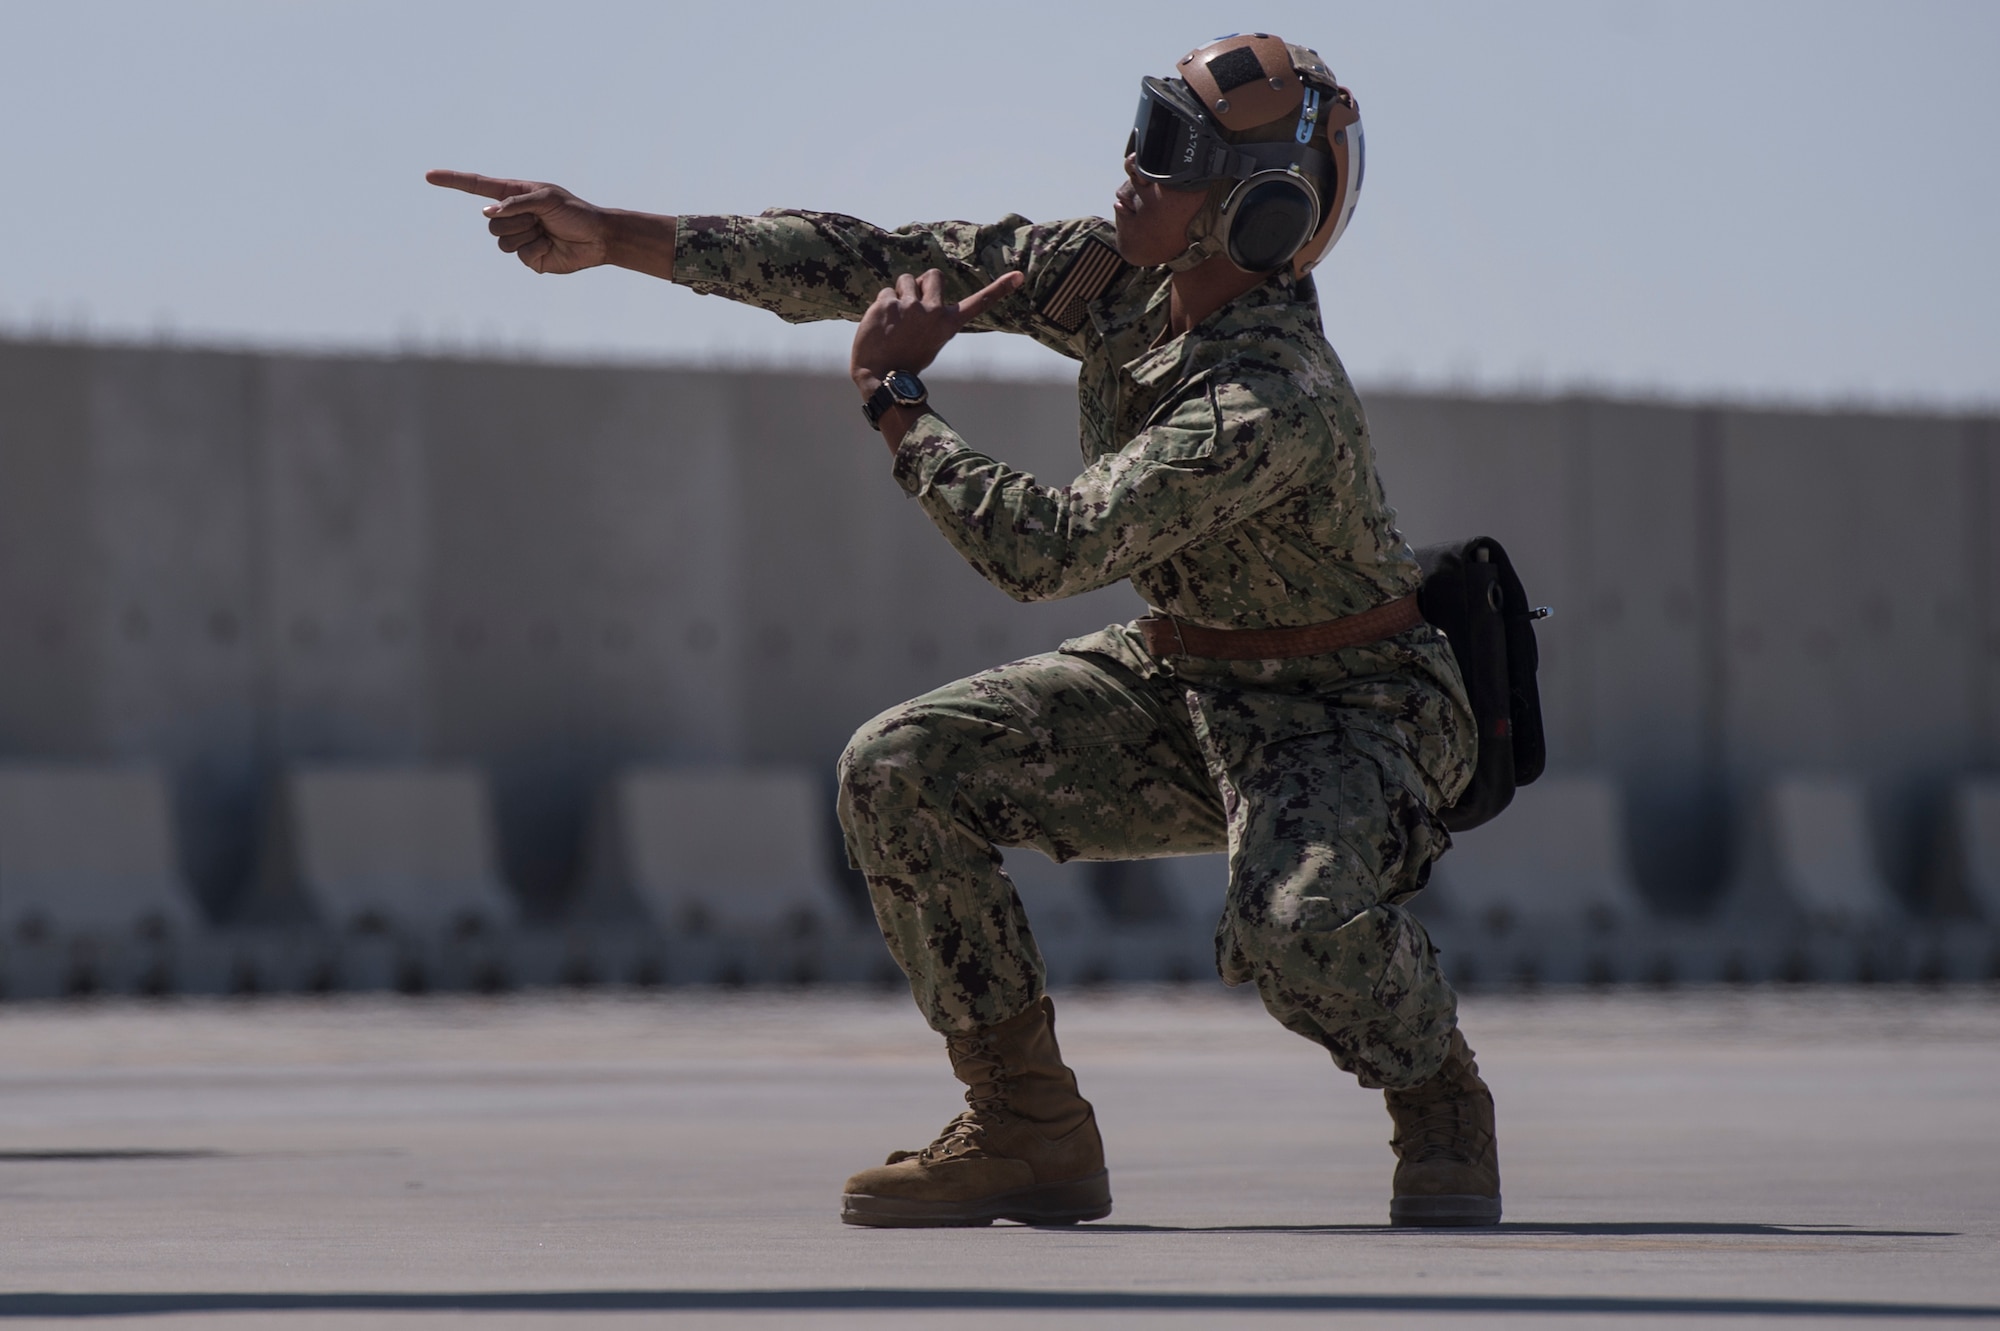 U.S. Navy Airman Shannon Barde, Electronic Attack Squadron 135 (VAQ-135) “Black Ravens” plane captain, uses hand signals to ensure pre-flight inspections for an EA-18G Growler are conducted safely March 2, 2019, at Al Udeid Air Base, Qatar. VAQ-135 is deployed to the U.S. 5th Fleet area of operations in support of naval operations to ensure maritime stability and security in the Central Region, connecting the Mediterranean and the Pacific through the western Indian Ocean and three strategic choke points. The squadron’s EA-18G Growlers employ an electronic attack capability in support of combat missions across the region. (U.S. Air Force photo by Tech. Sgt. Christopher Hubenthal)